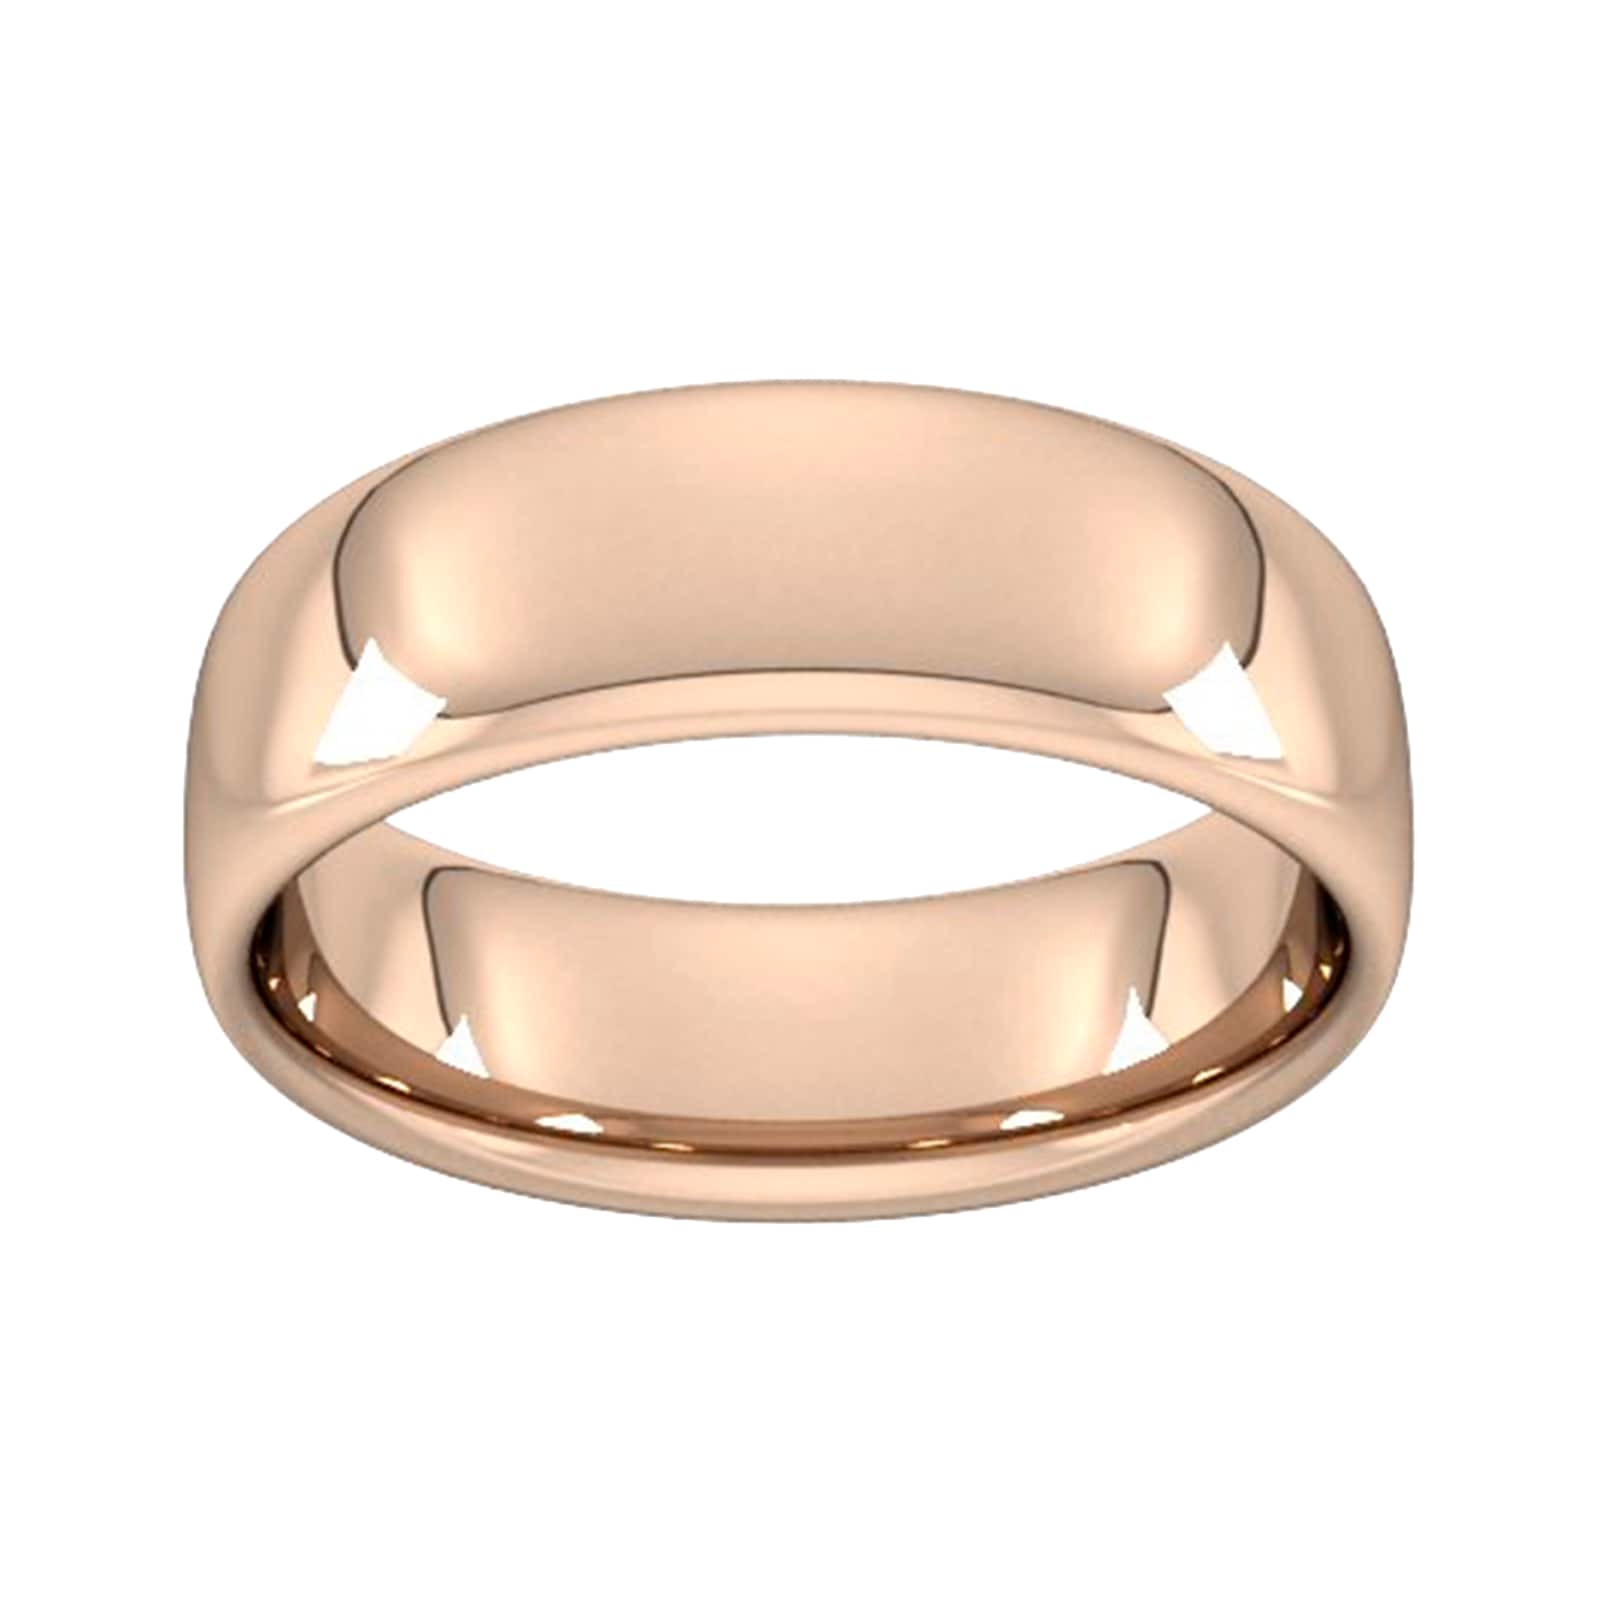 7mm Slight Court Heavy Wedding Ring In 9 Carat Rose Gold - Ring Size X